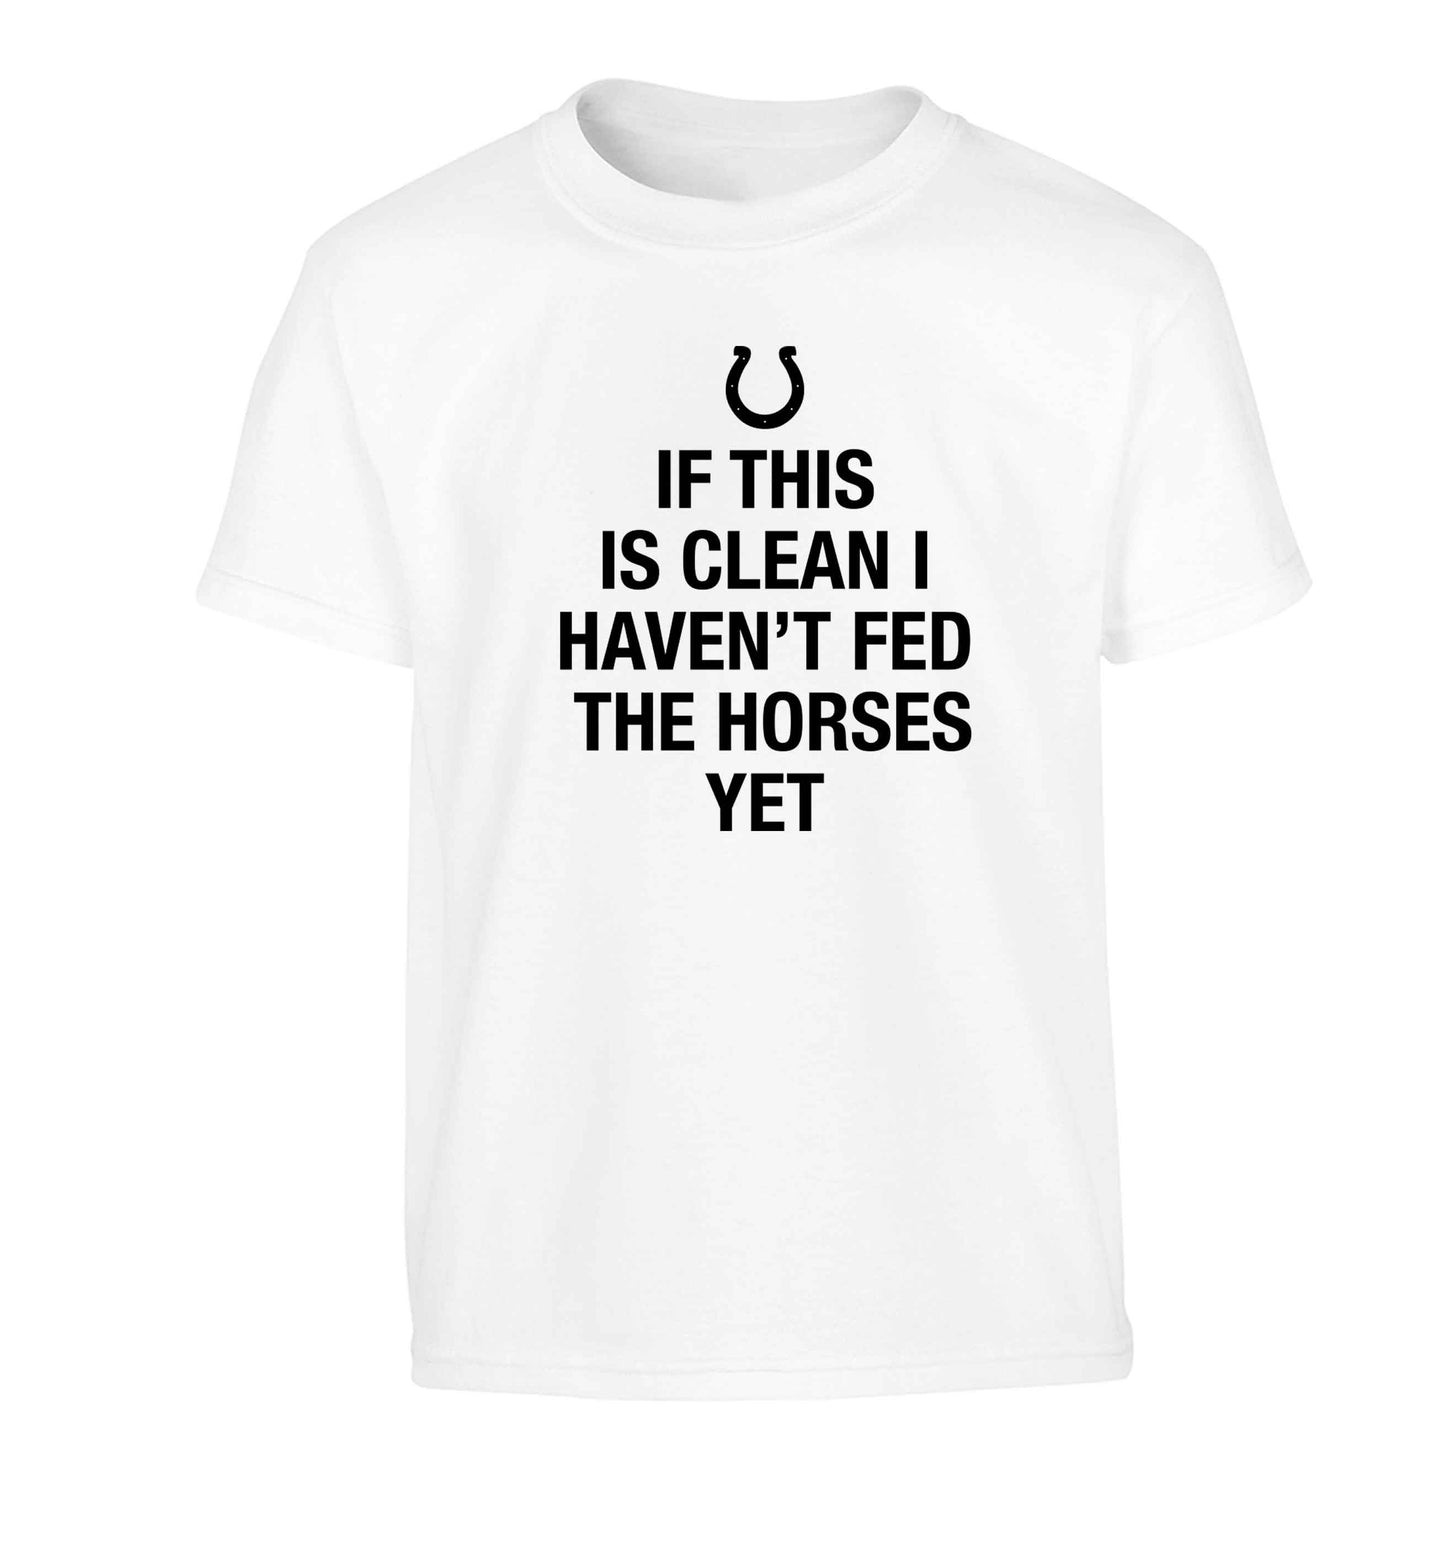 If this isn't clean I haven't fed the horses yet Children's white Tshirt 12-13 Years